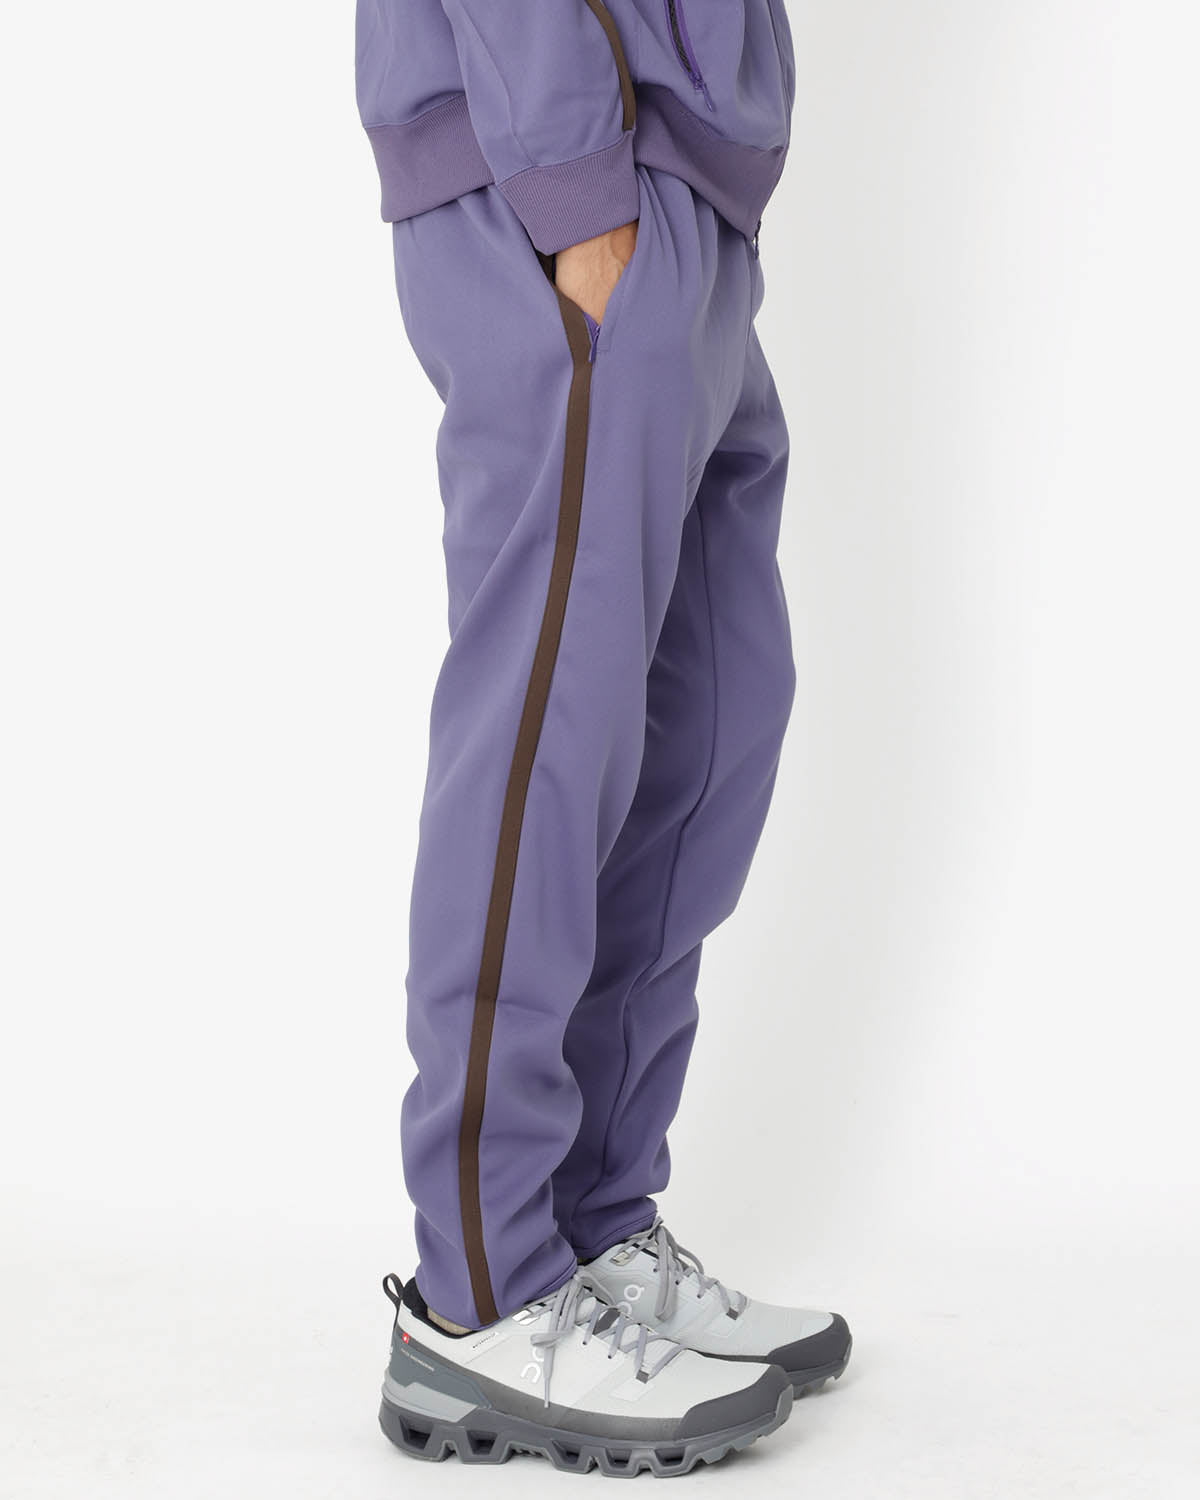 TRAINER PANT - POLY SMOOTH